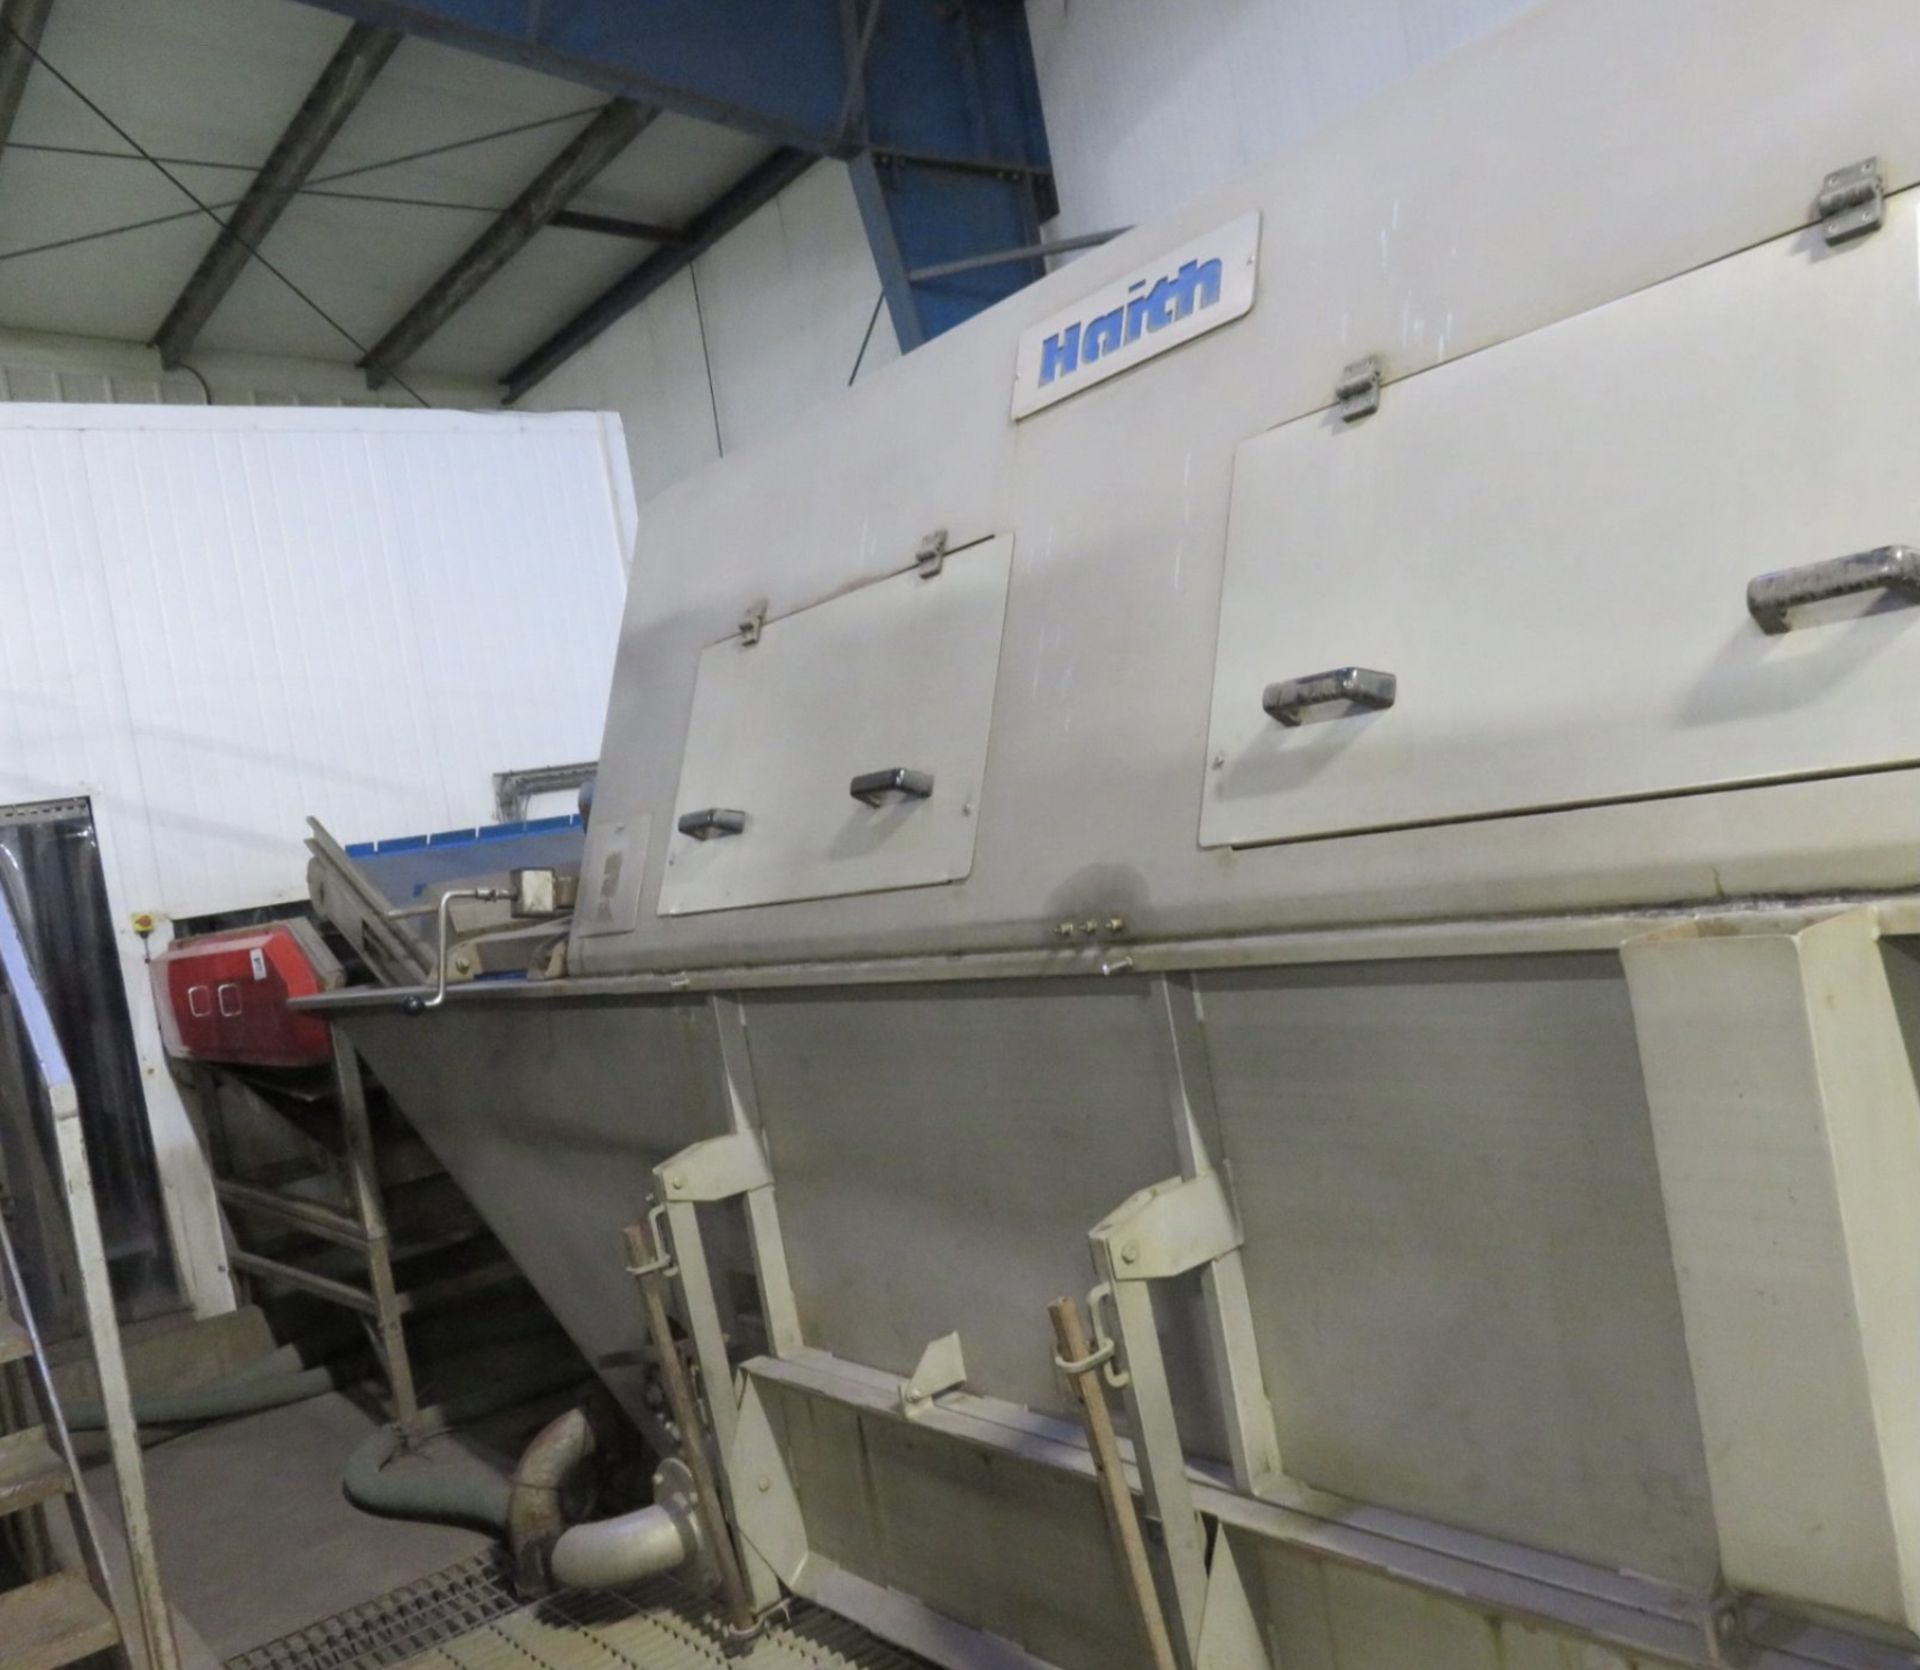 Haith Stainless Steel Washer, approx. 2m wide, ove - Image 2 of 5